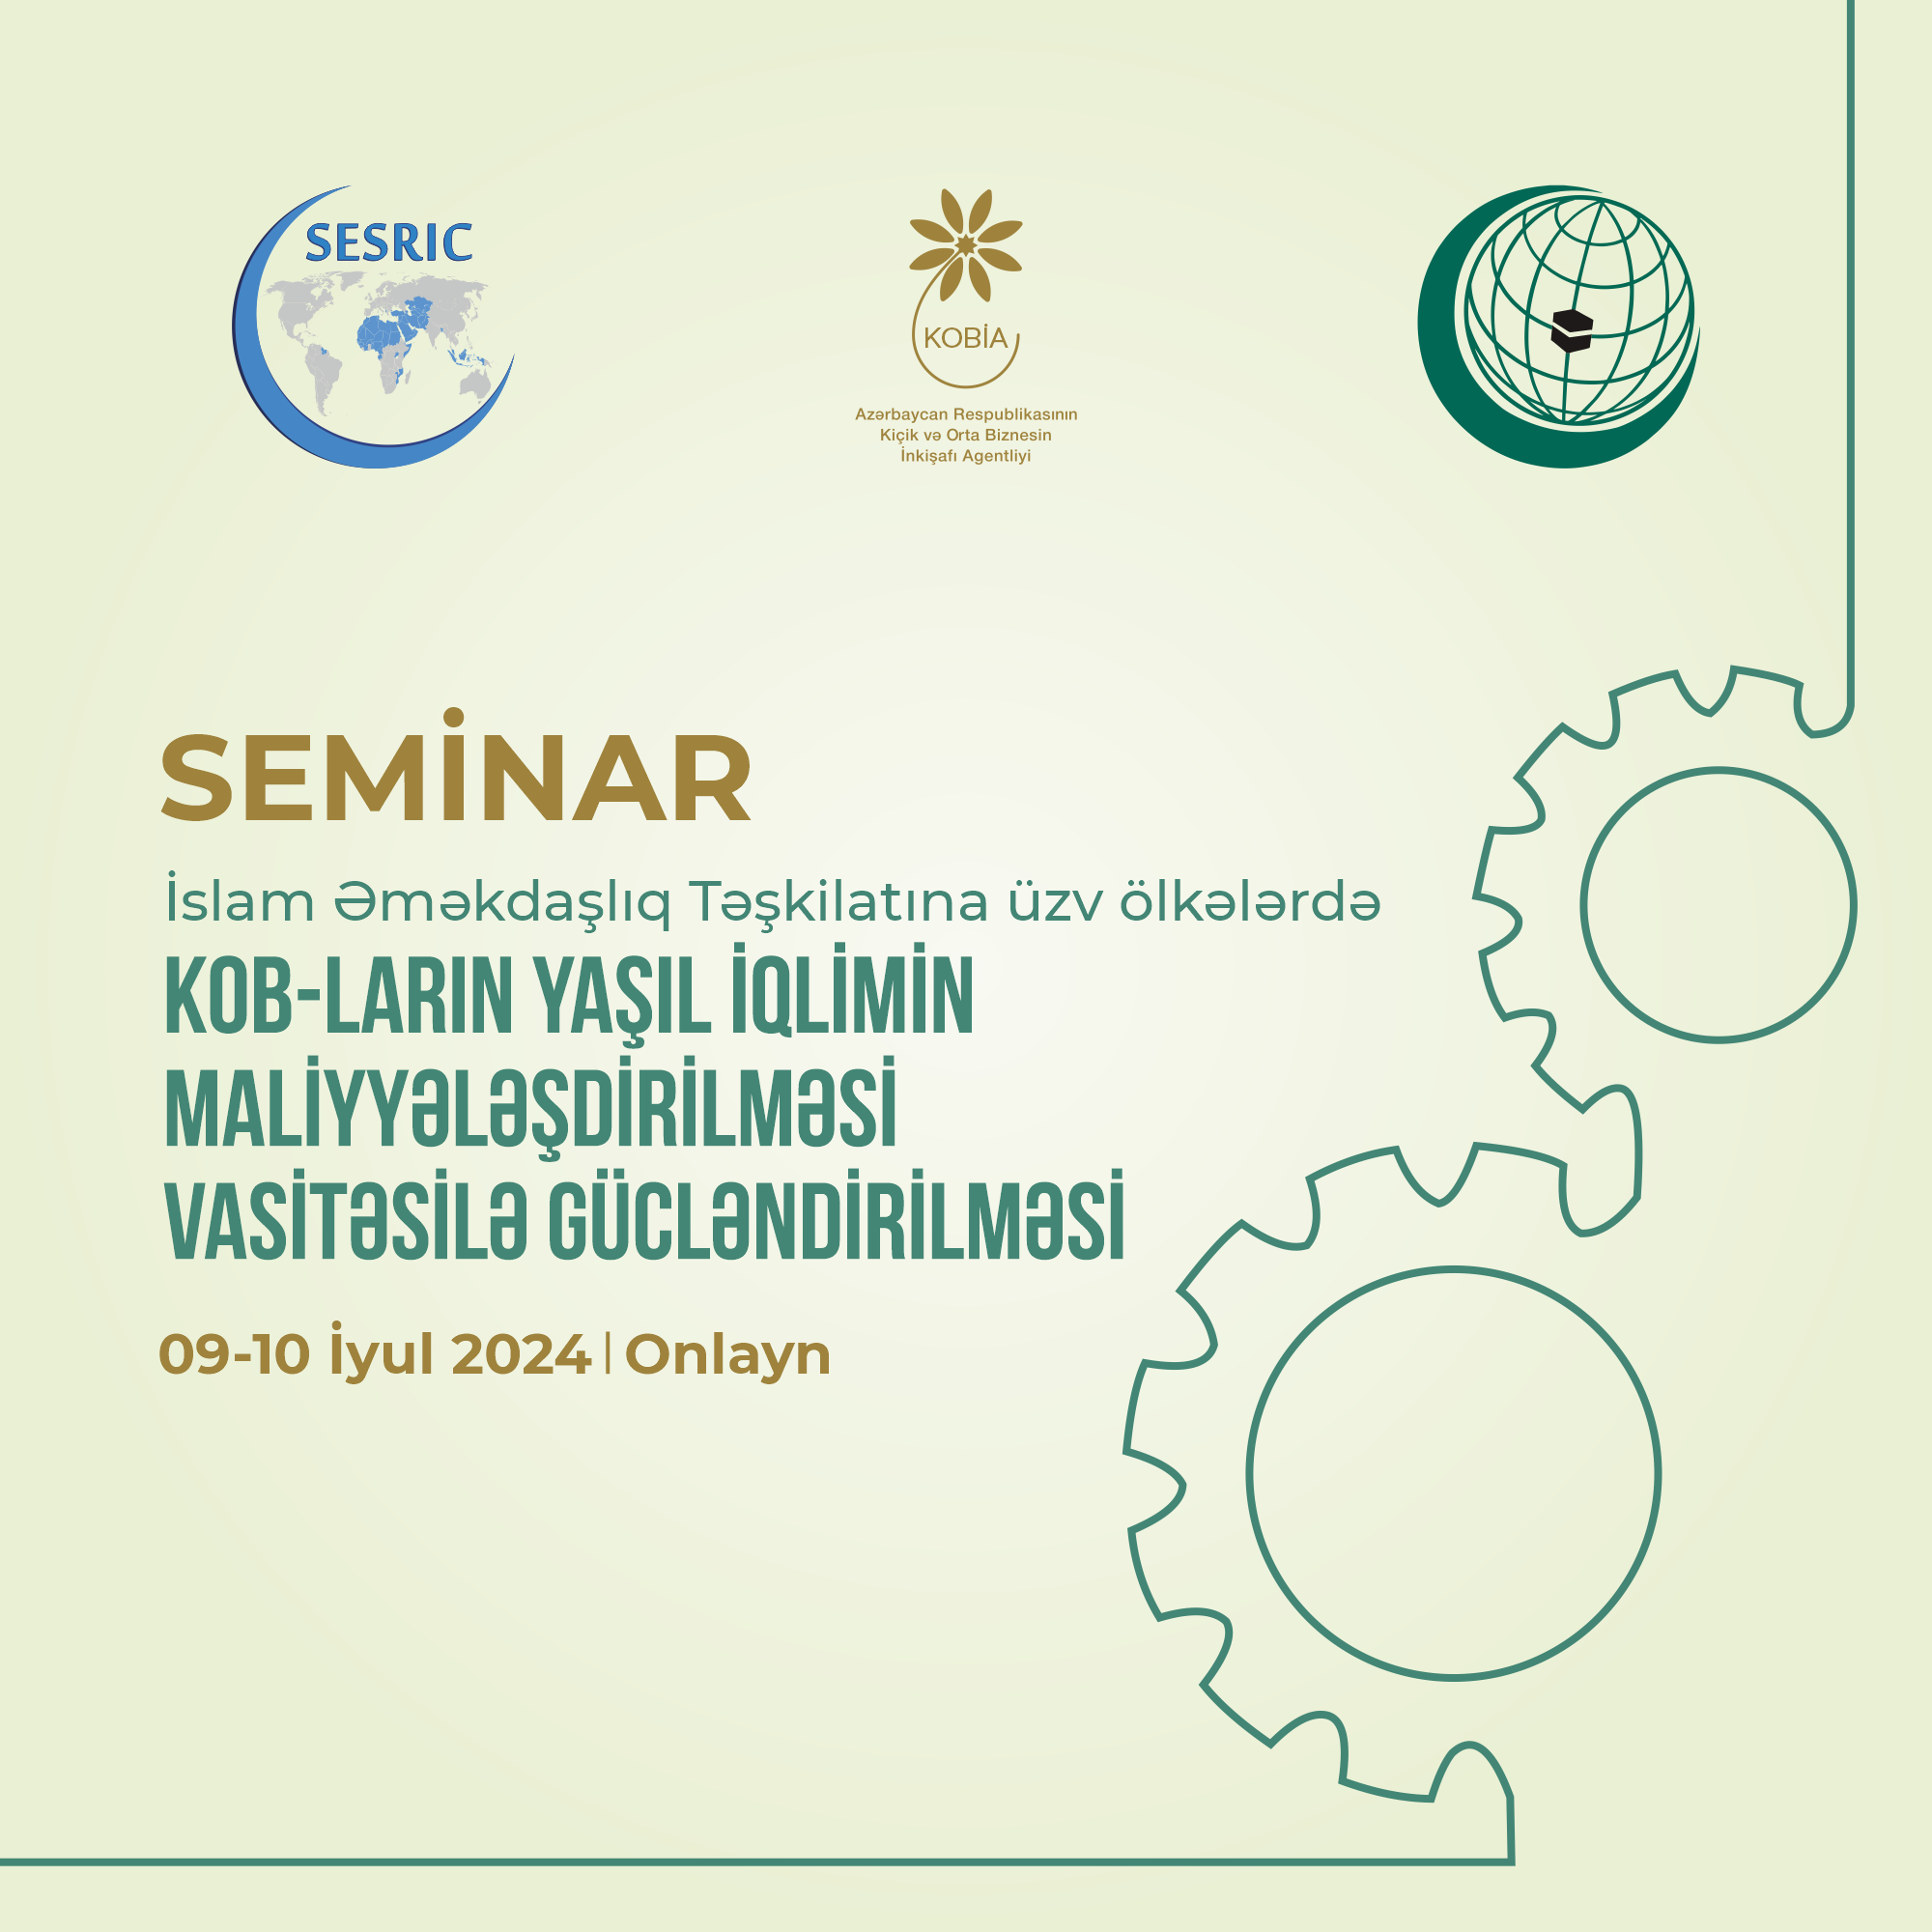 A seminar on climate finance for SMBs will be held